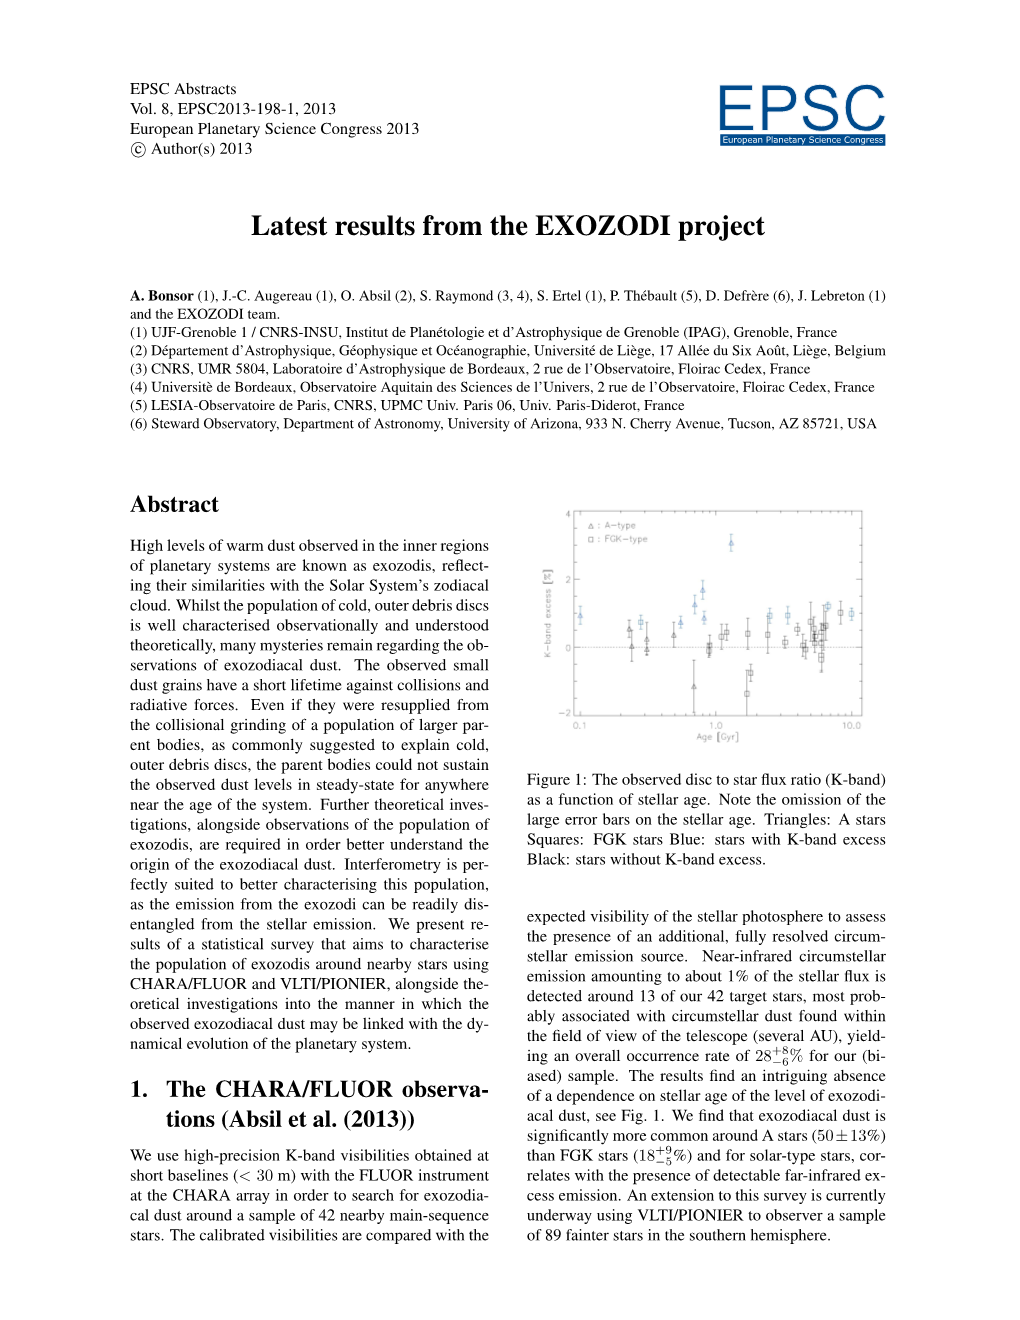 Latest Results from the EXOZODI Project